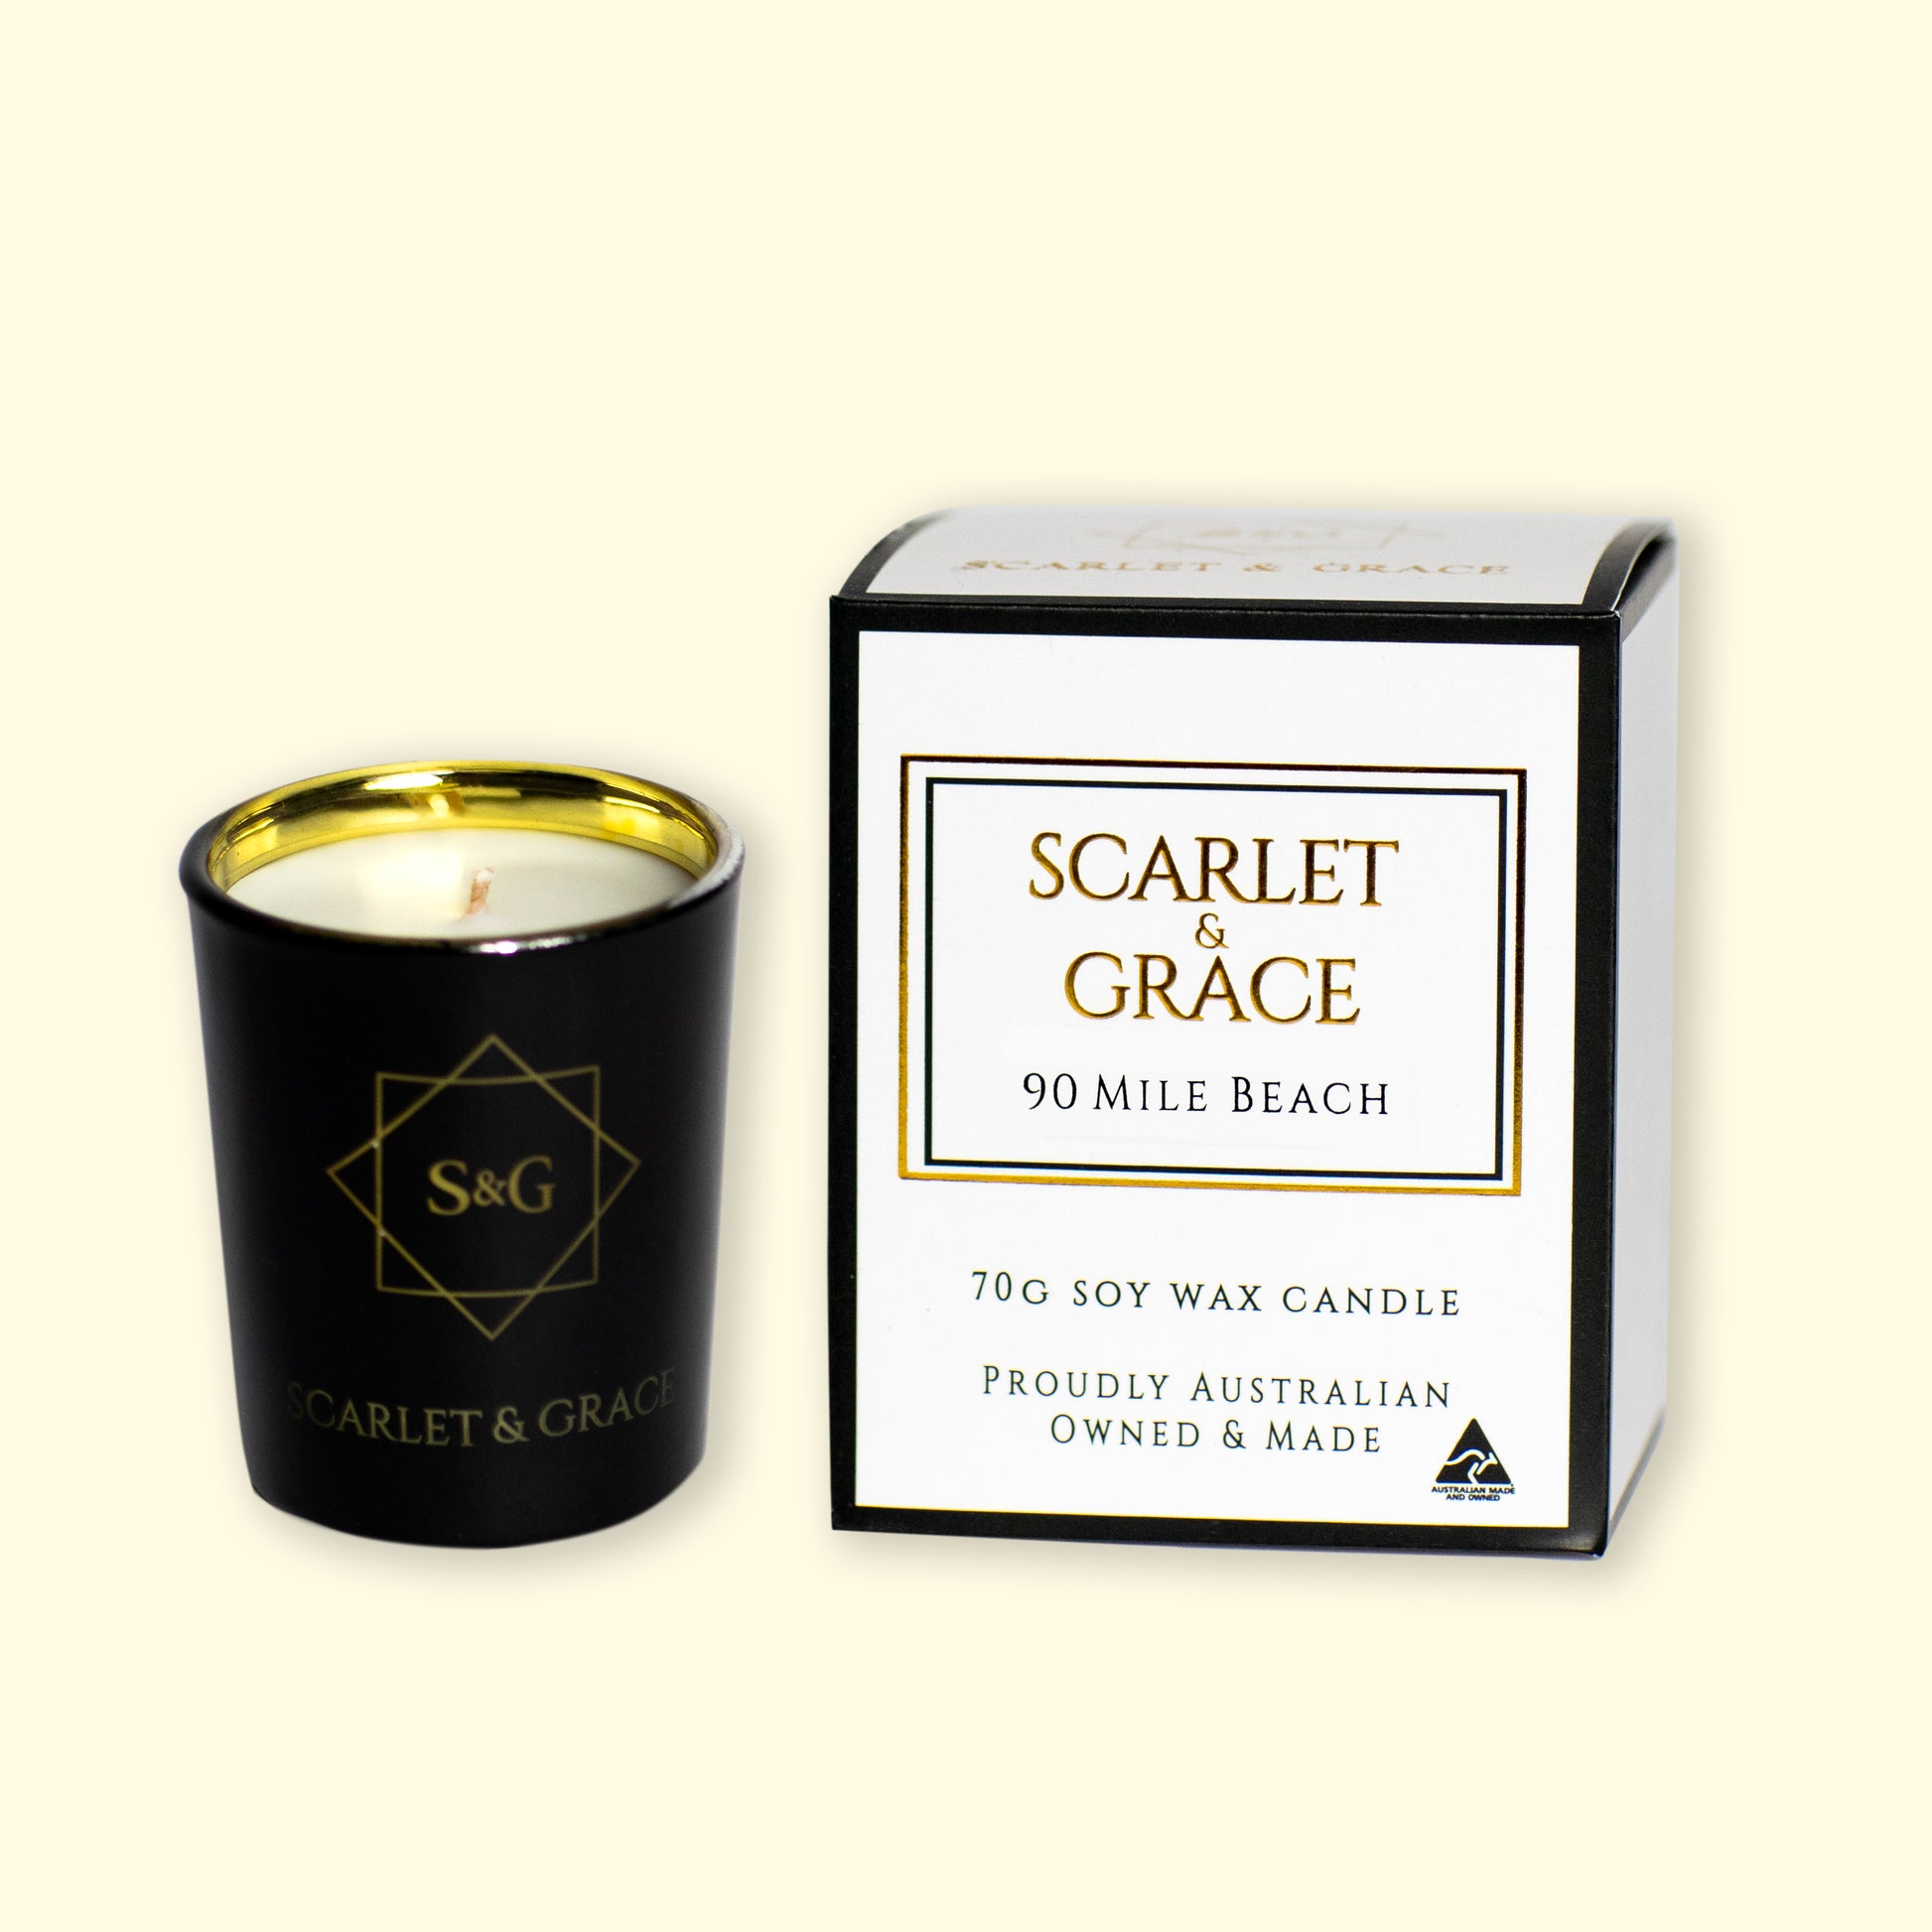 90 Mile Beach - 70gm Soy Wax Candle - Scarlet & Grace